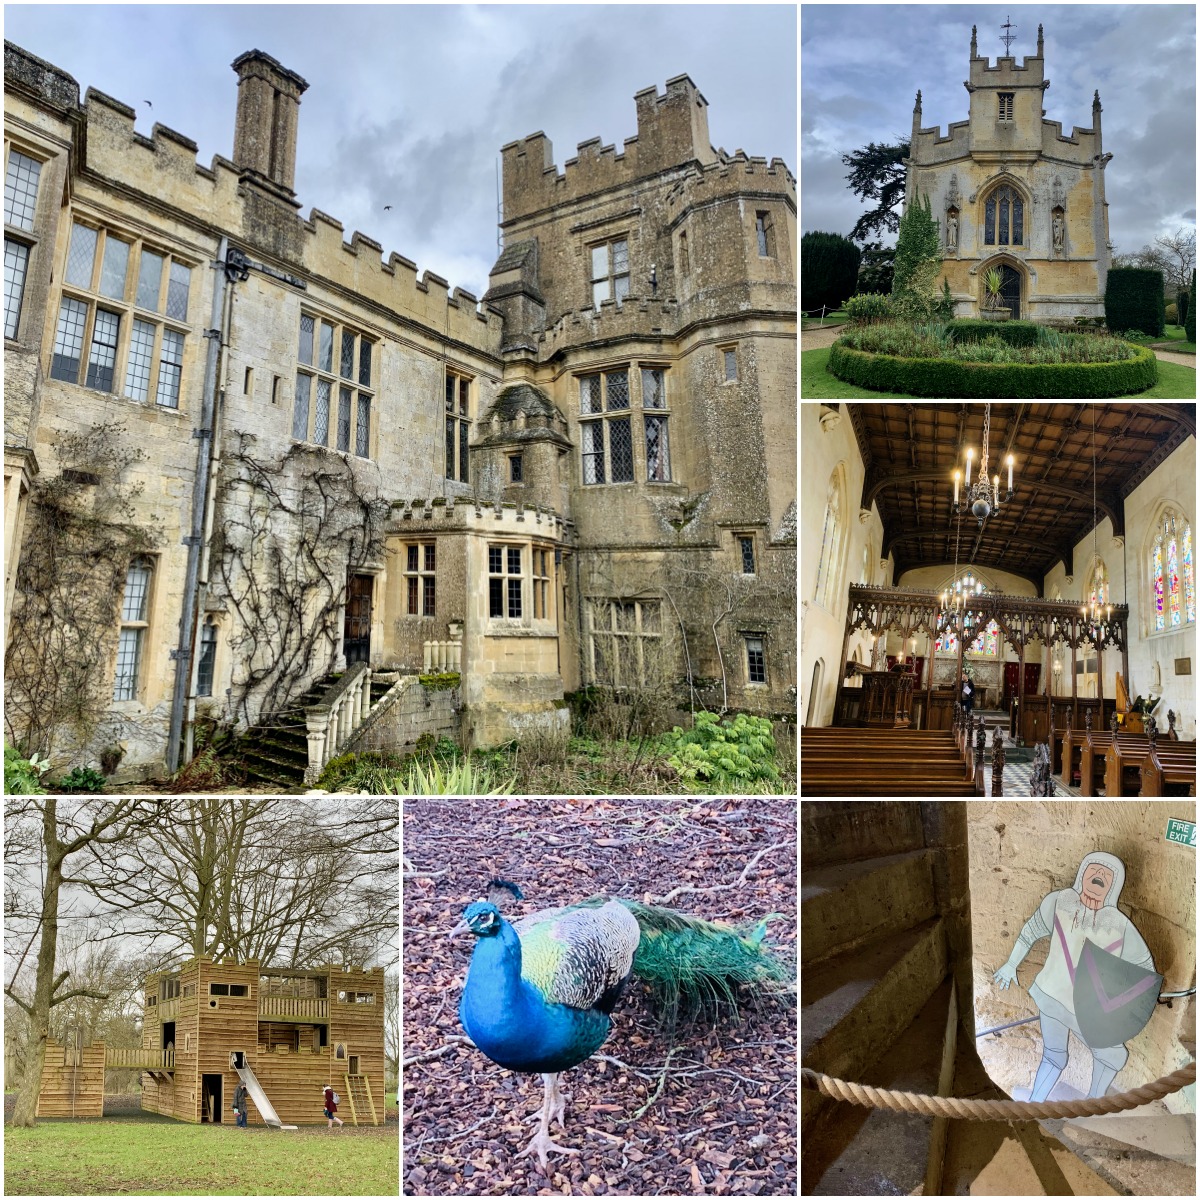 Images of Sudeley Castle